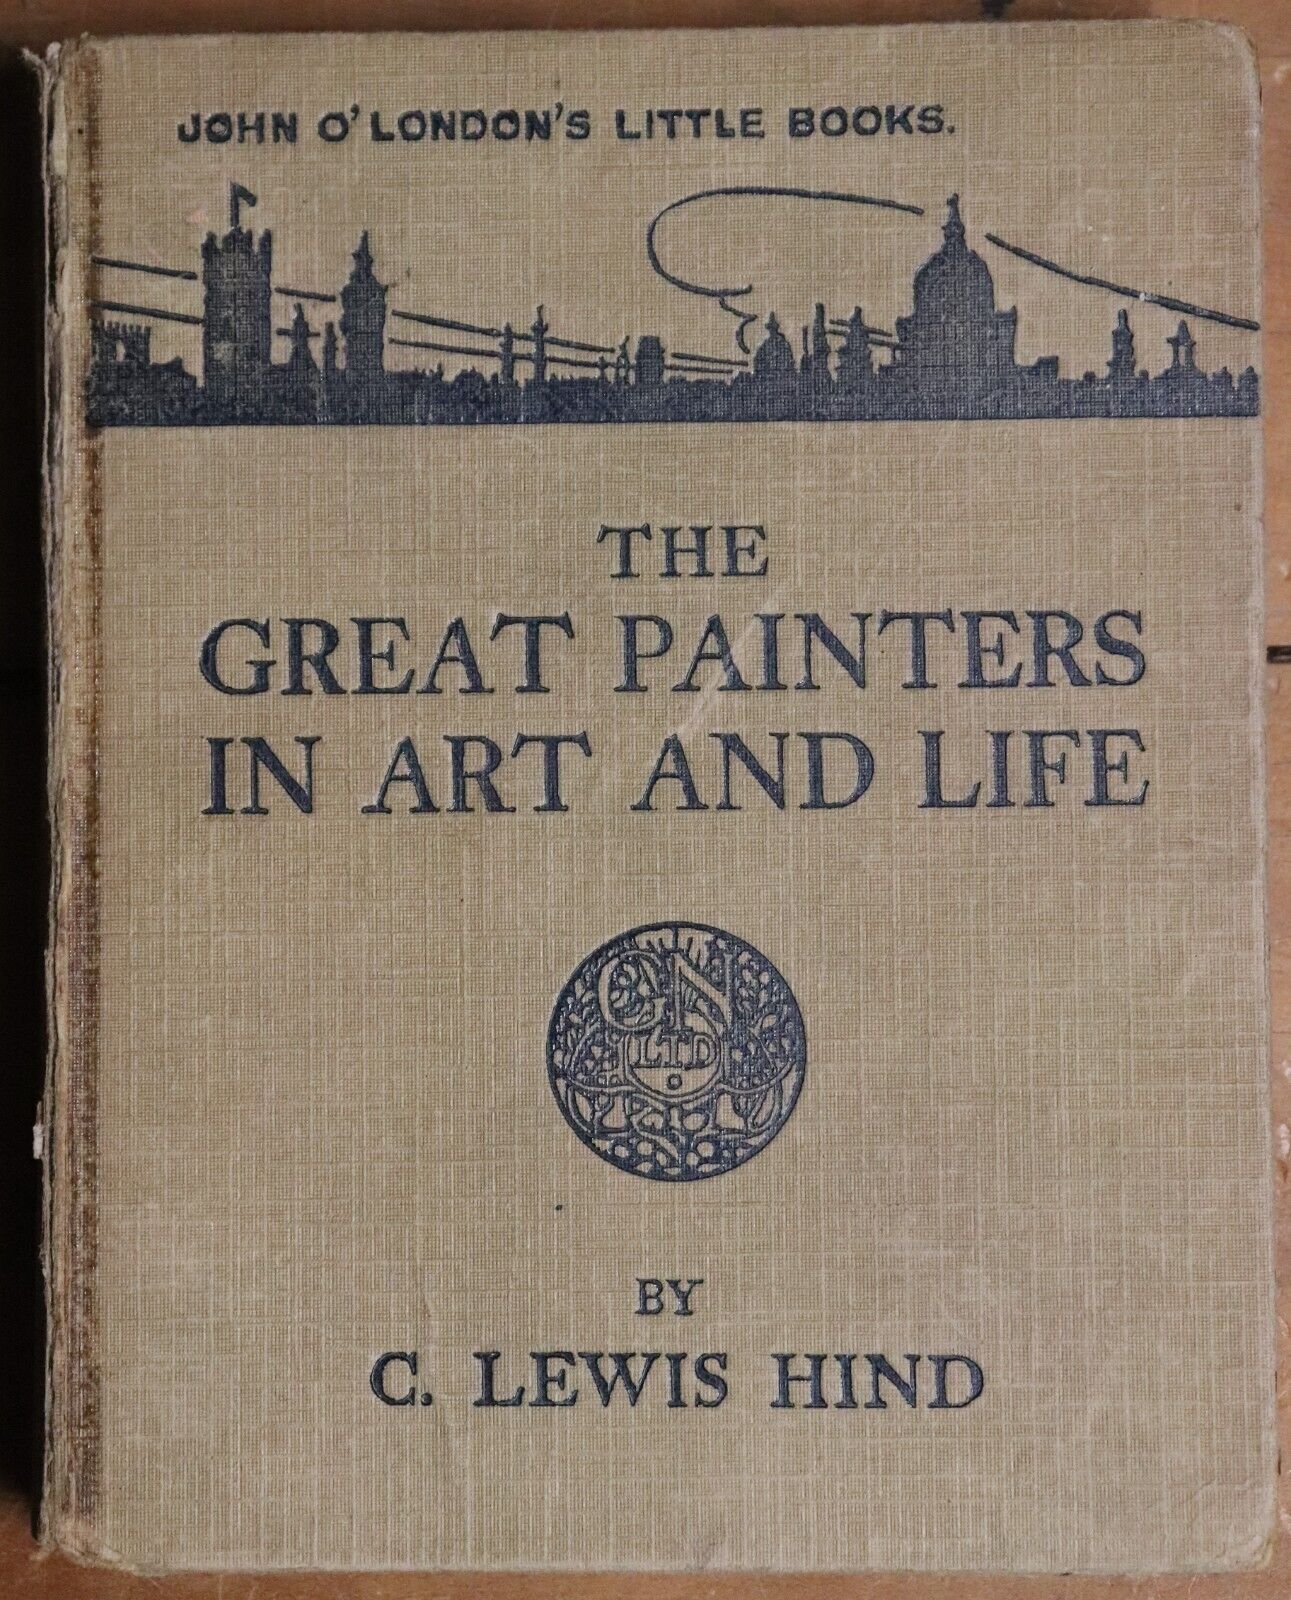 The Great Painters in Art and Life - c1927 - 1st Edition Vintage Art Book